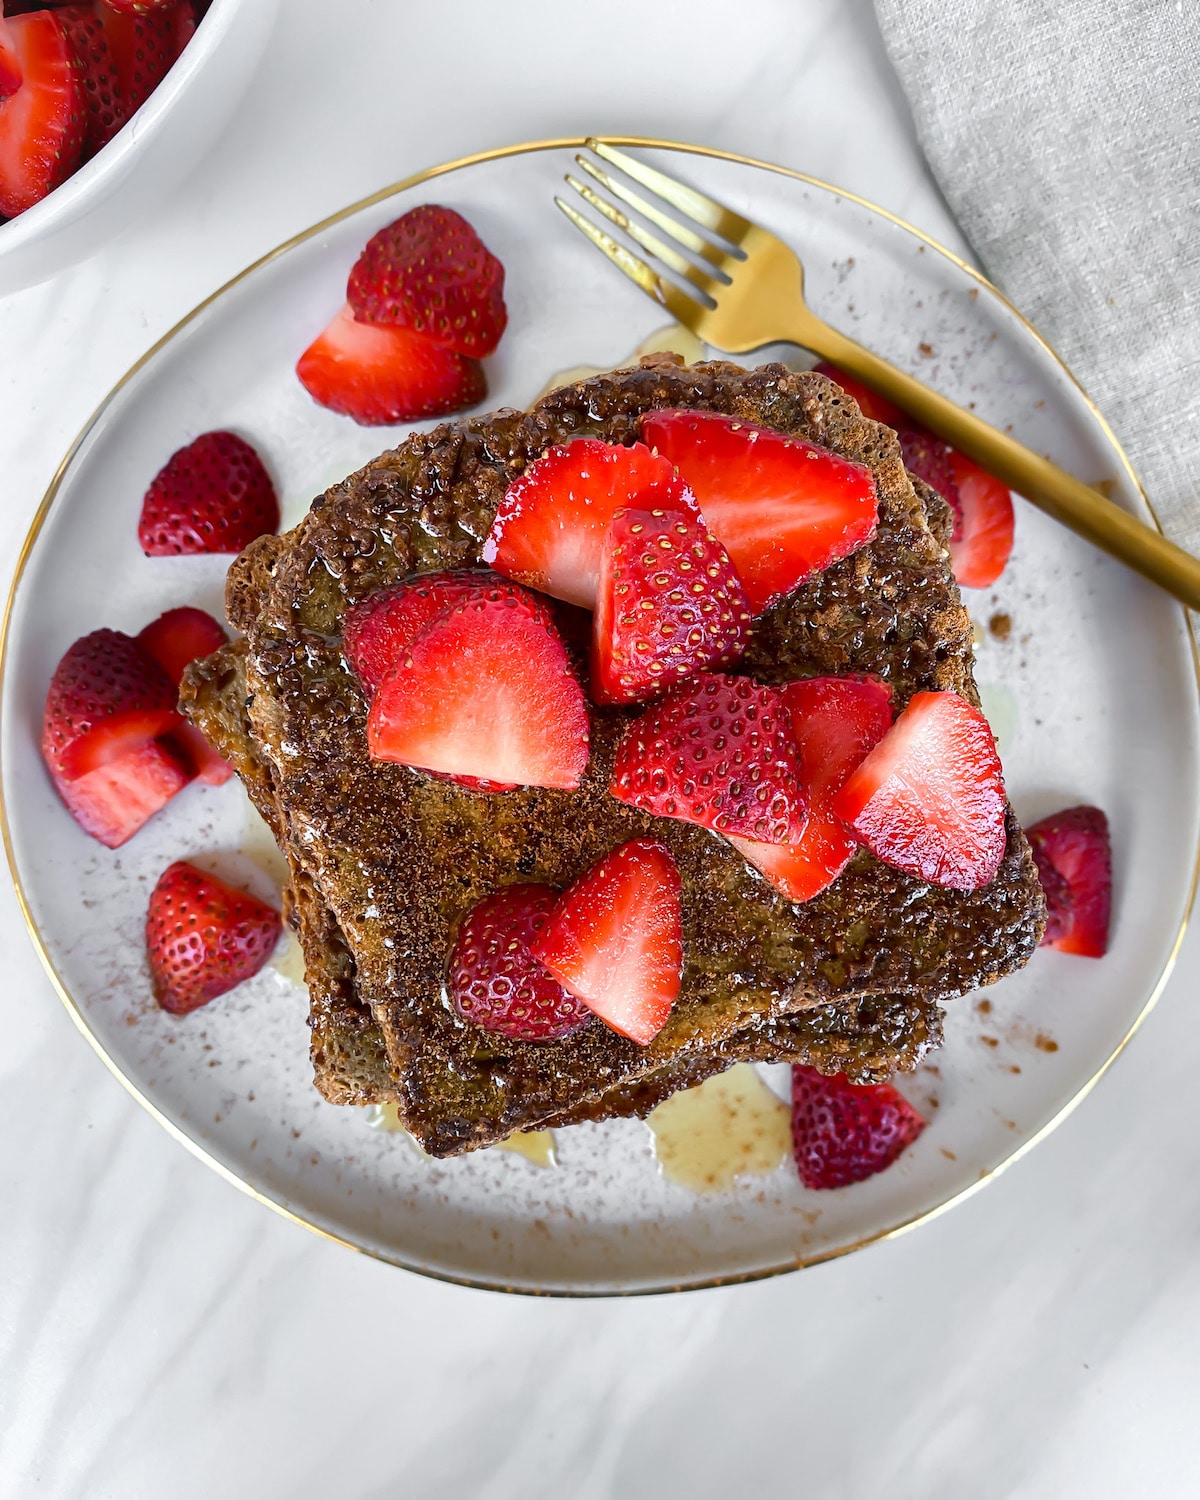 Healthy vegan gluten free golden brown french toast with bright red strawberries on top